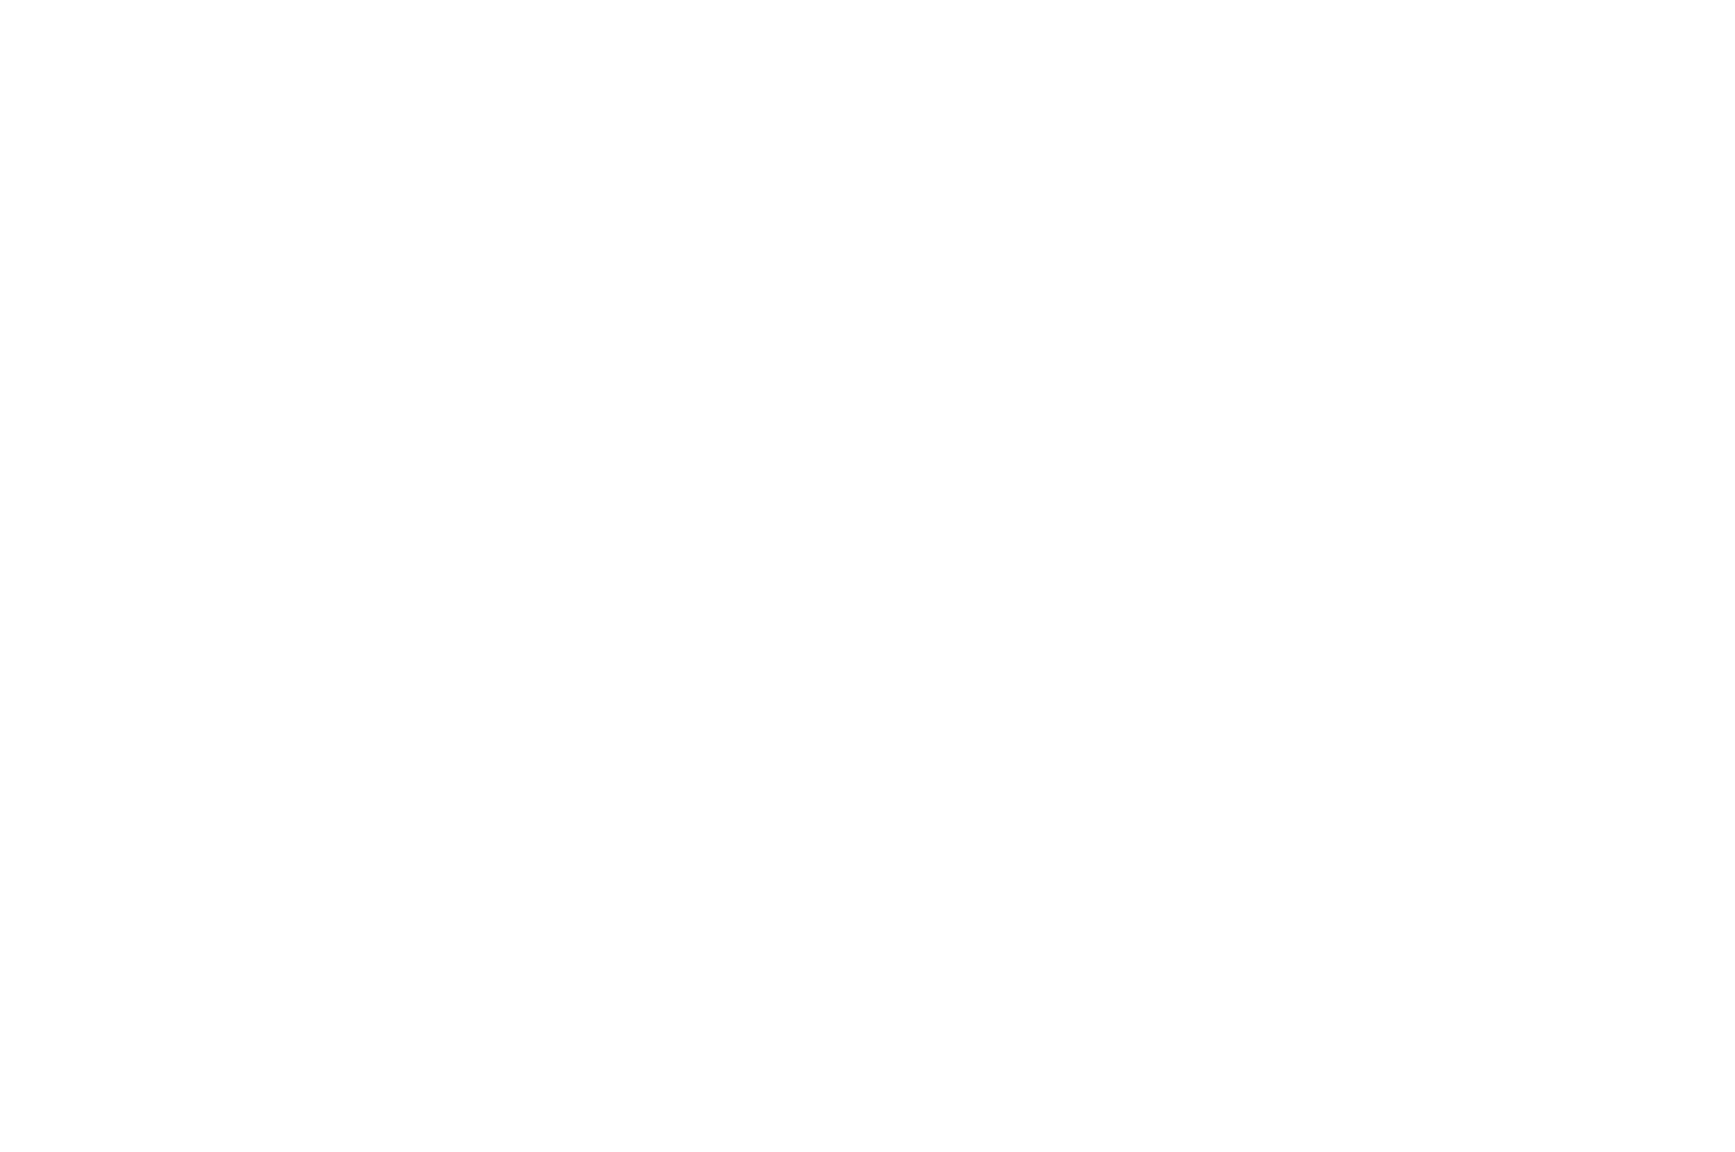 OFFICIAL SELECTION - Aesthetica Film Festival - 2020.png